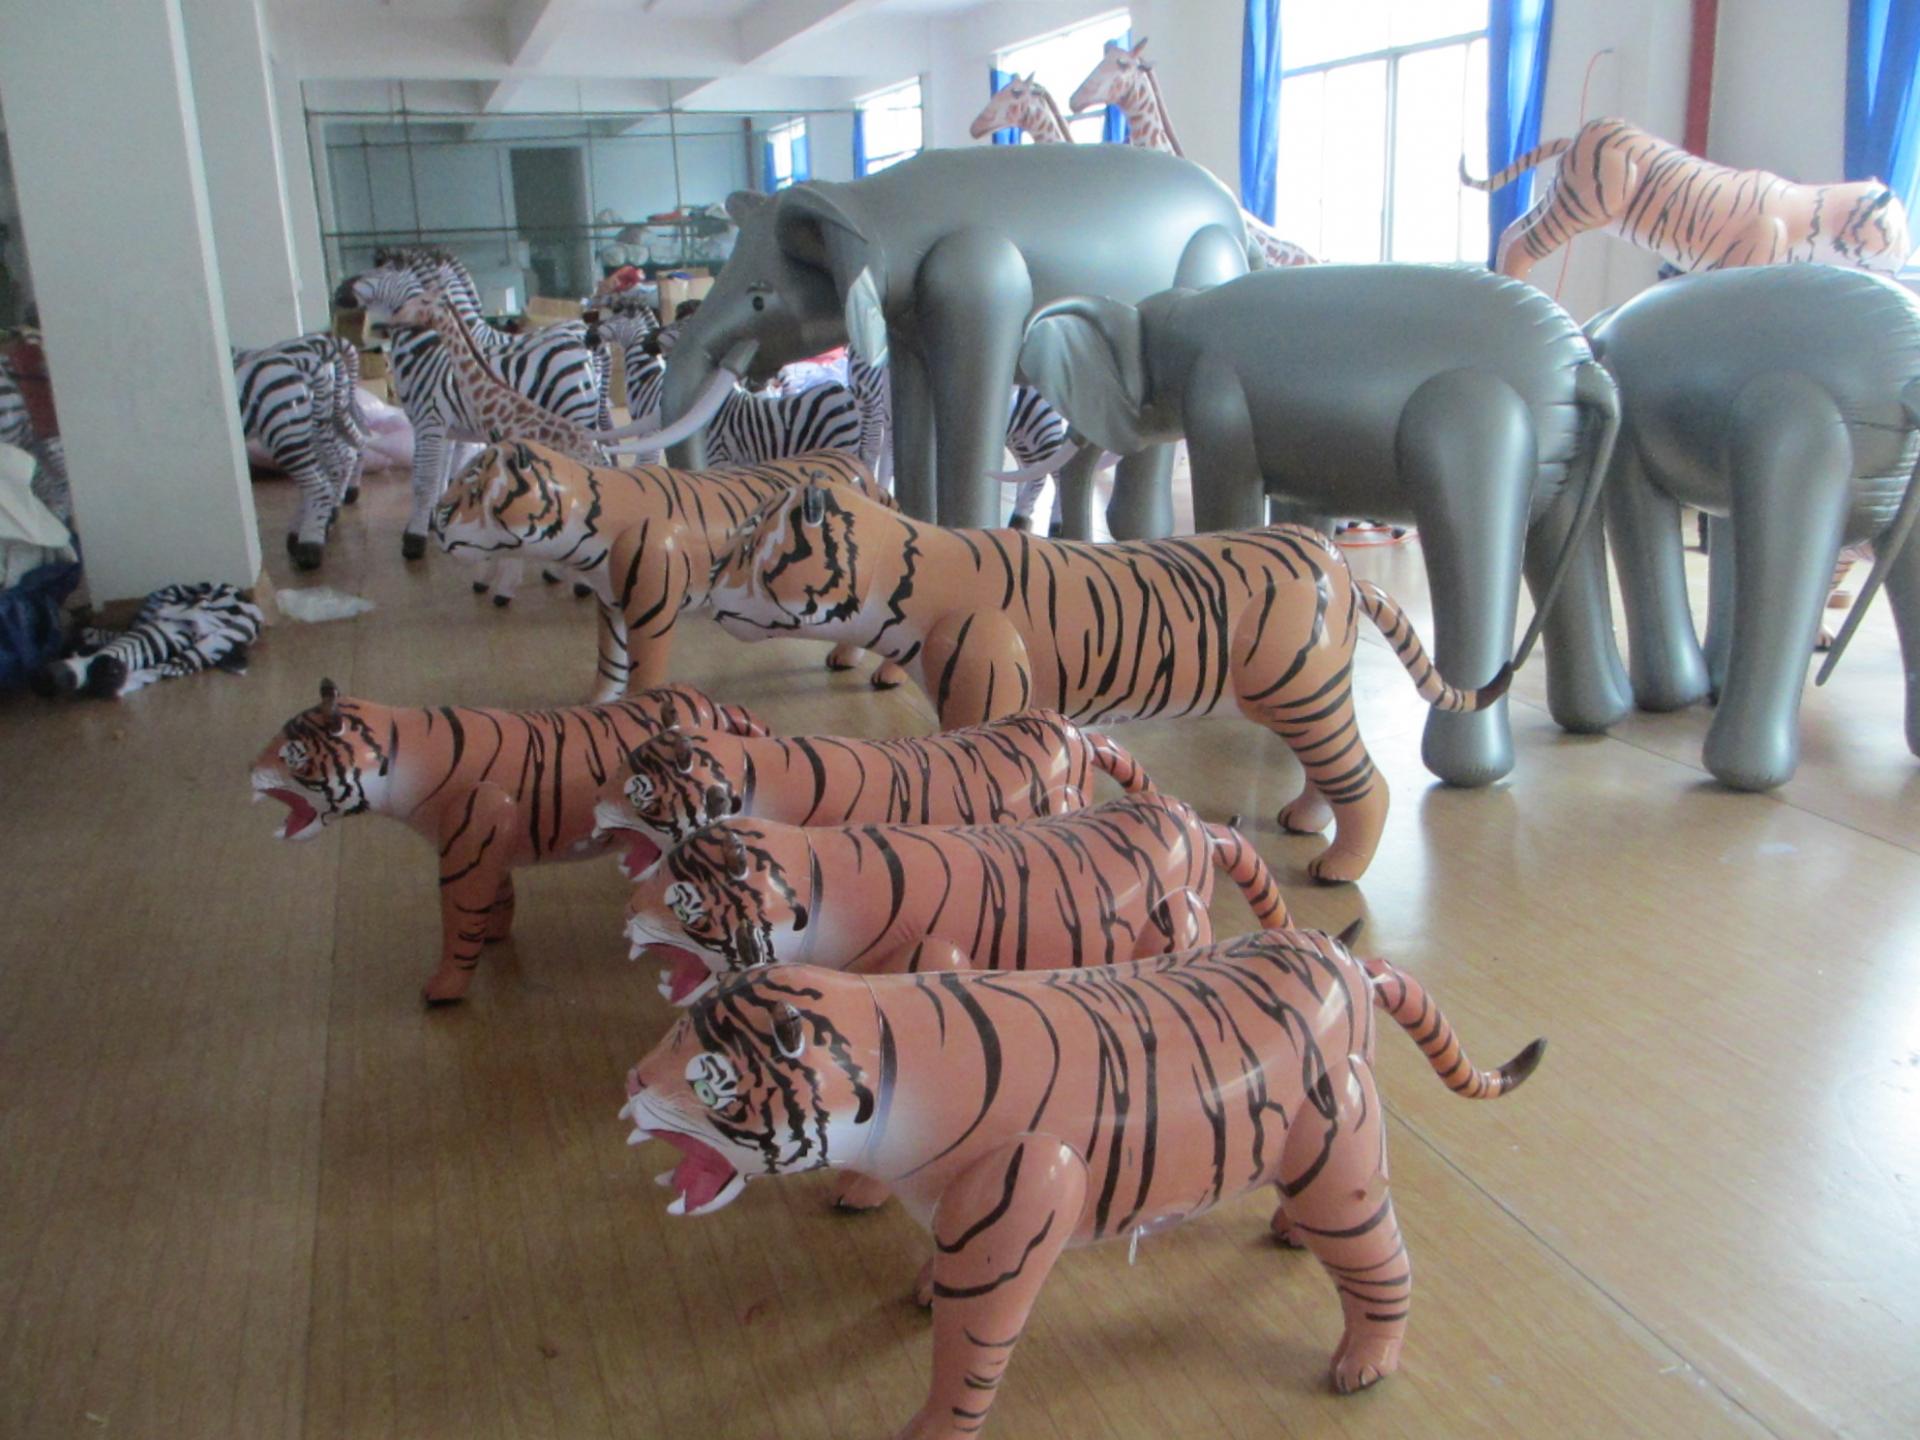 Customised Inflatable PVC Sealed Air Dorable Airblown Figures,Collection Tiger